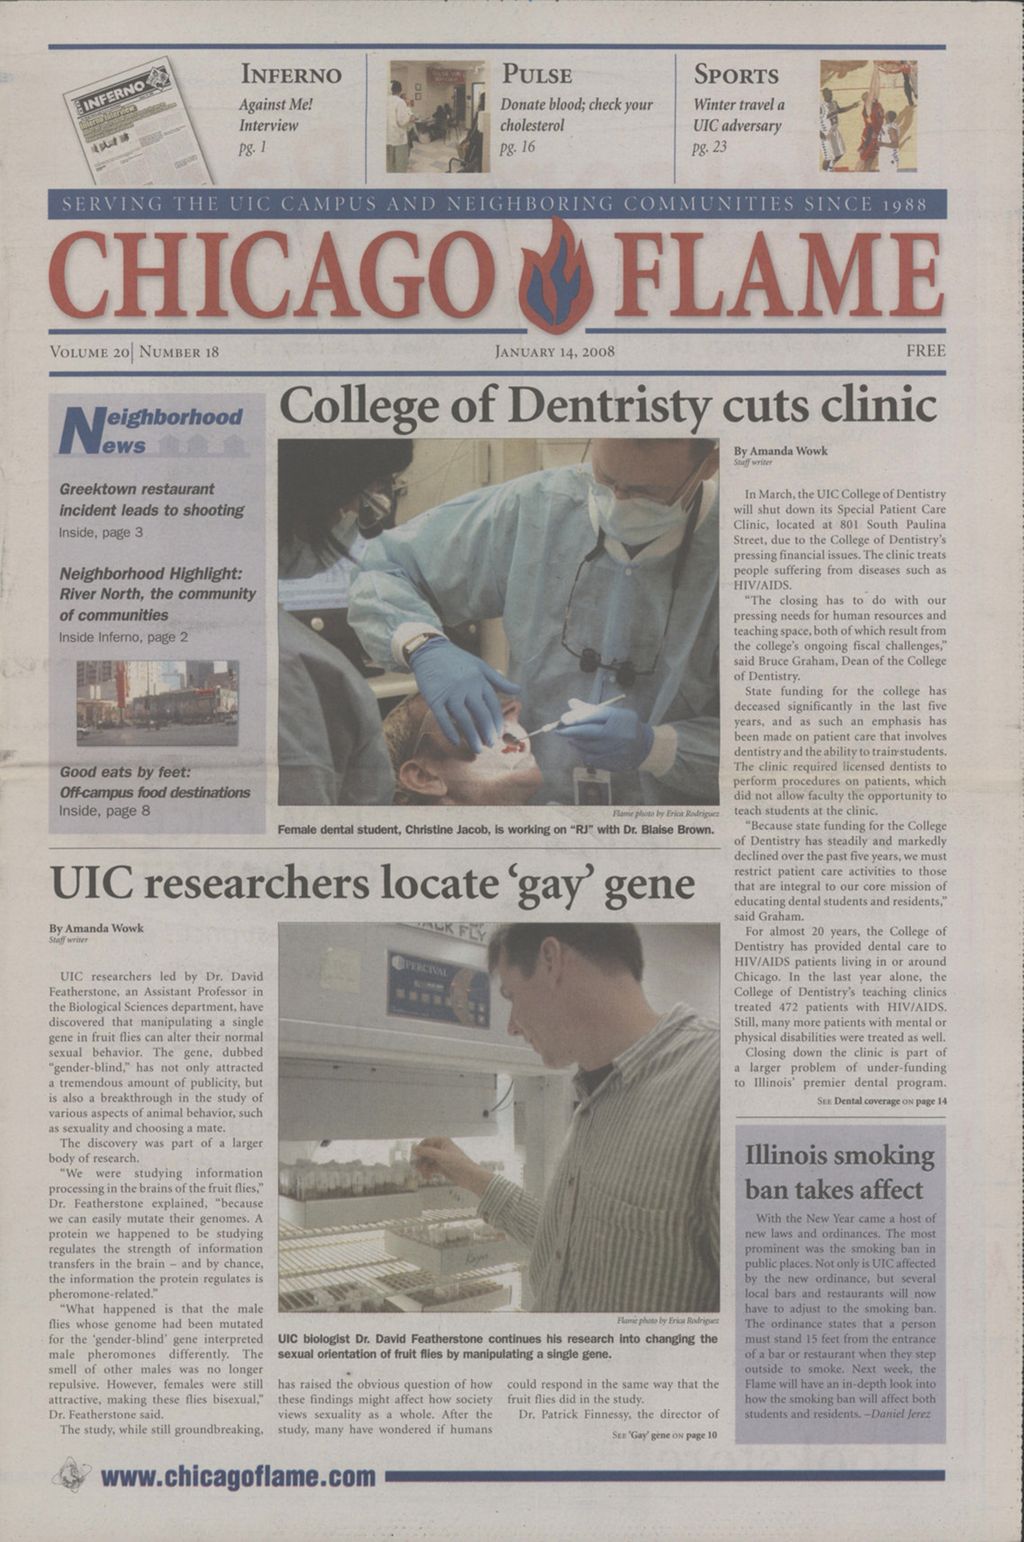 Miniature of Chicago Flame (January 14, 2008)